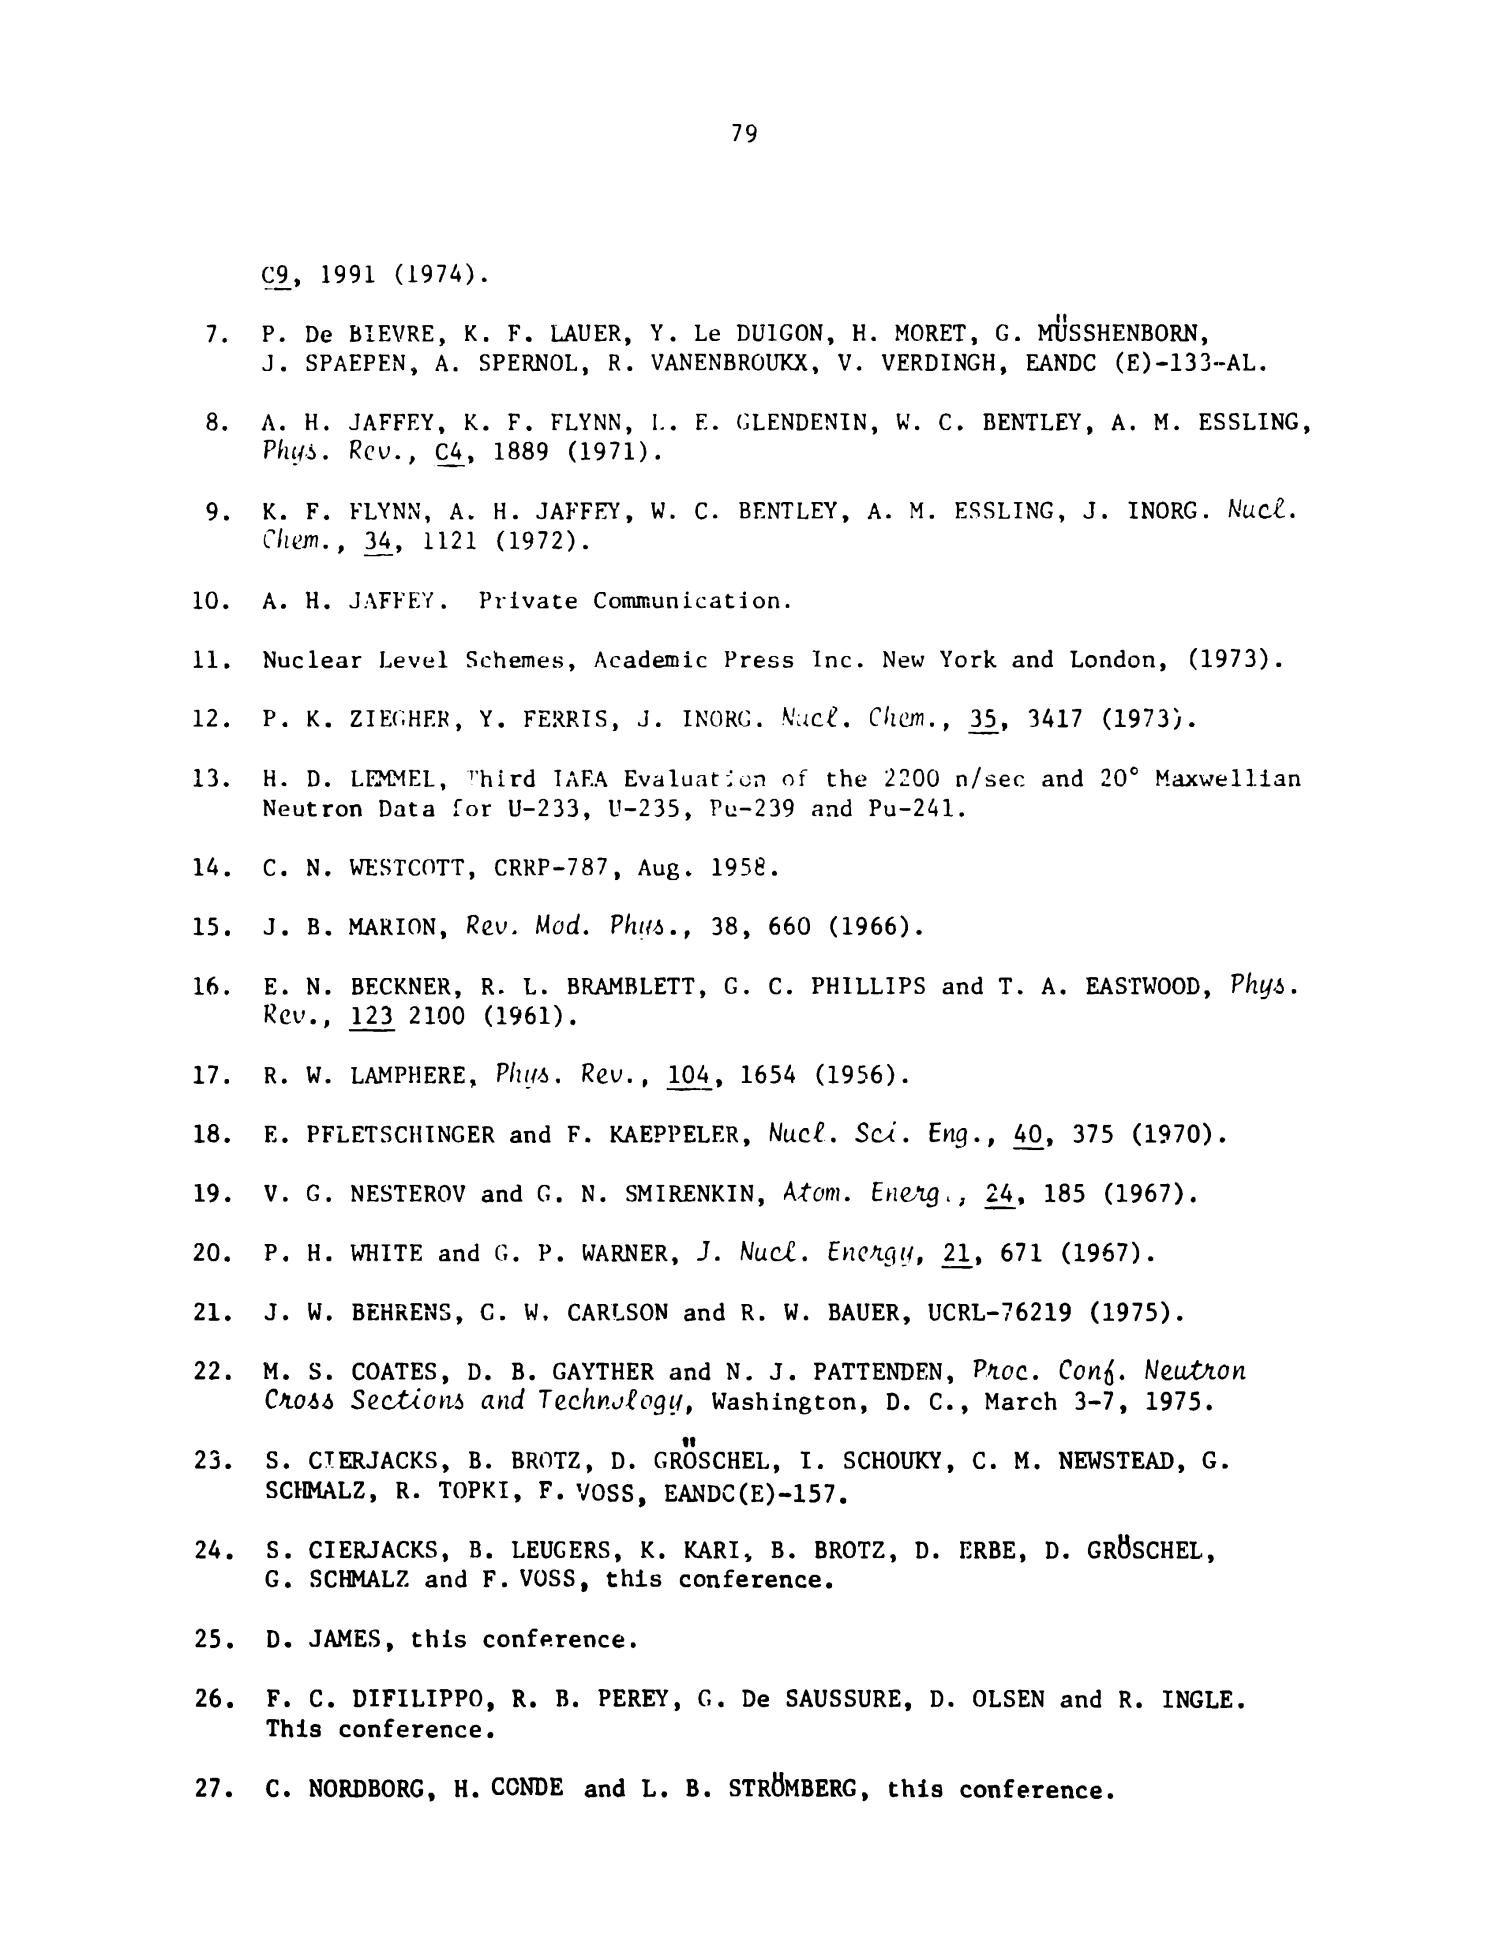 Proceedings Of The Neandc Neacrp Specialists Meeting On Fast Neutron Fission Cross Sections Of U 233 U 235 U 238 And Pu 239 June 28 30 1976 At Argonne National Laboratory Page 79 Unt Digital Library